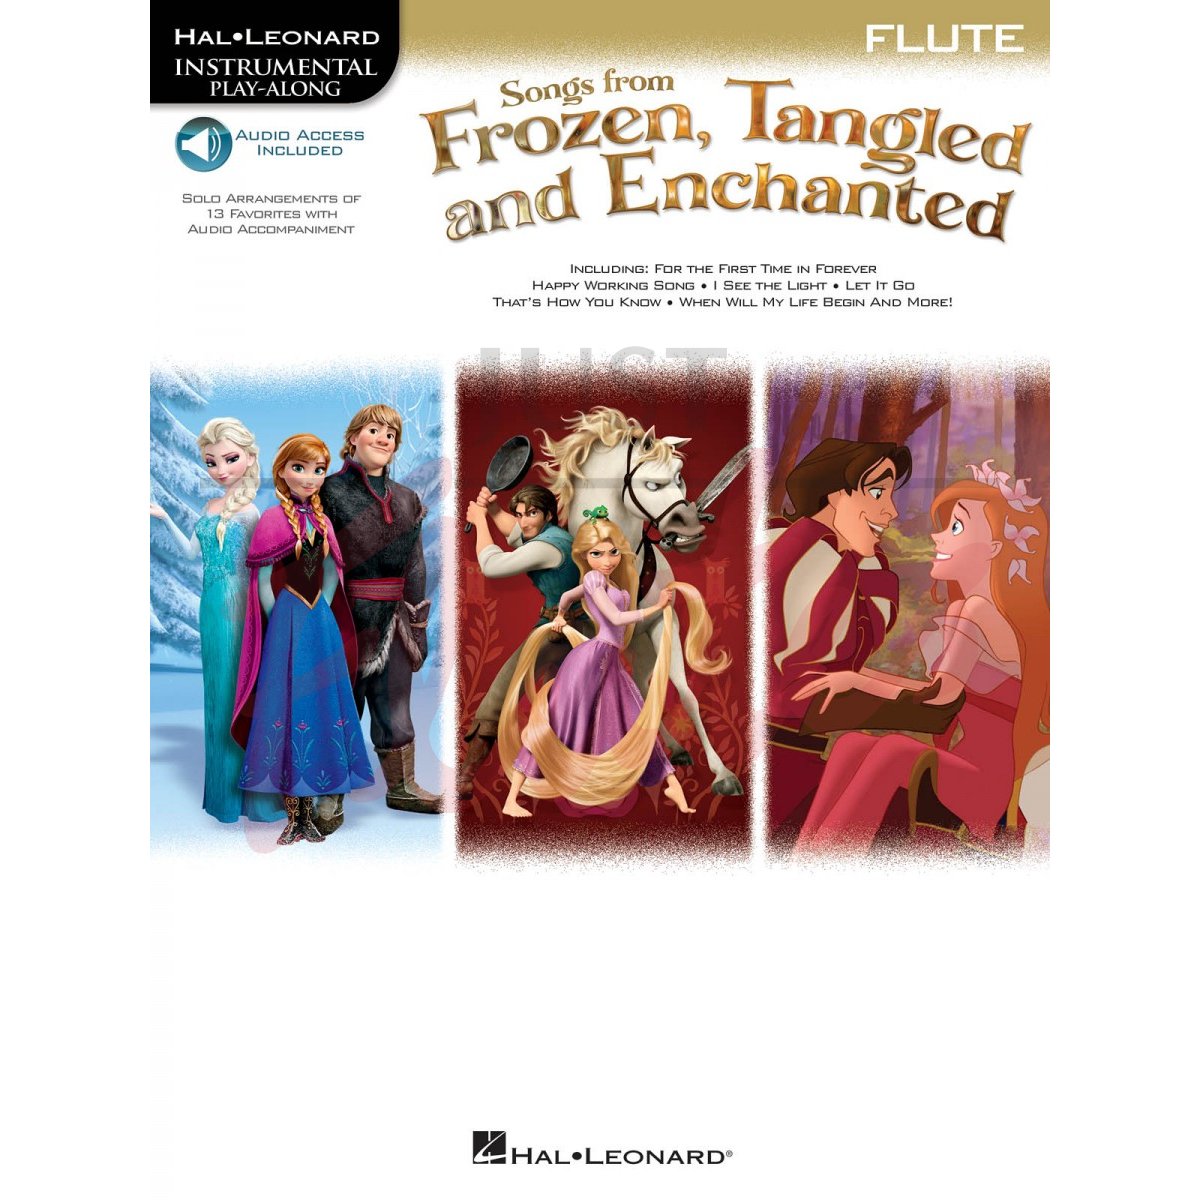 Songs from Frozen, Tangled and Enchanted Play-Along for Flute